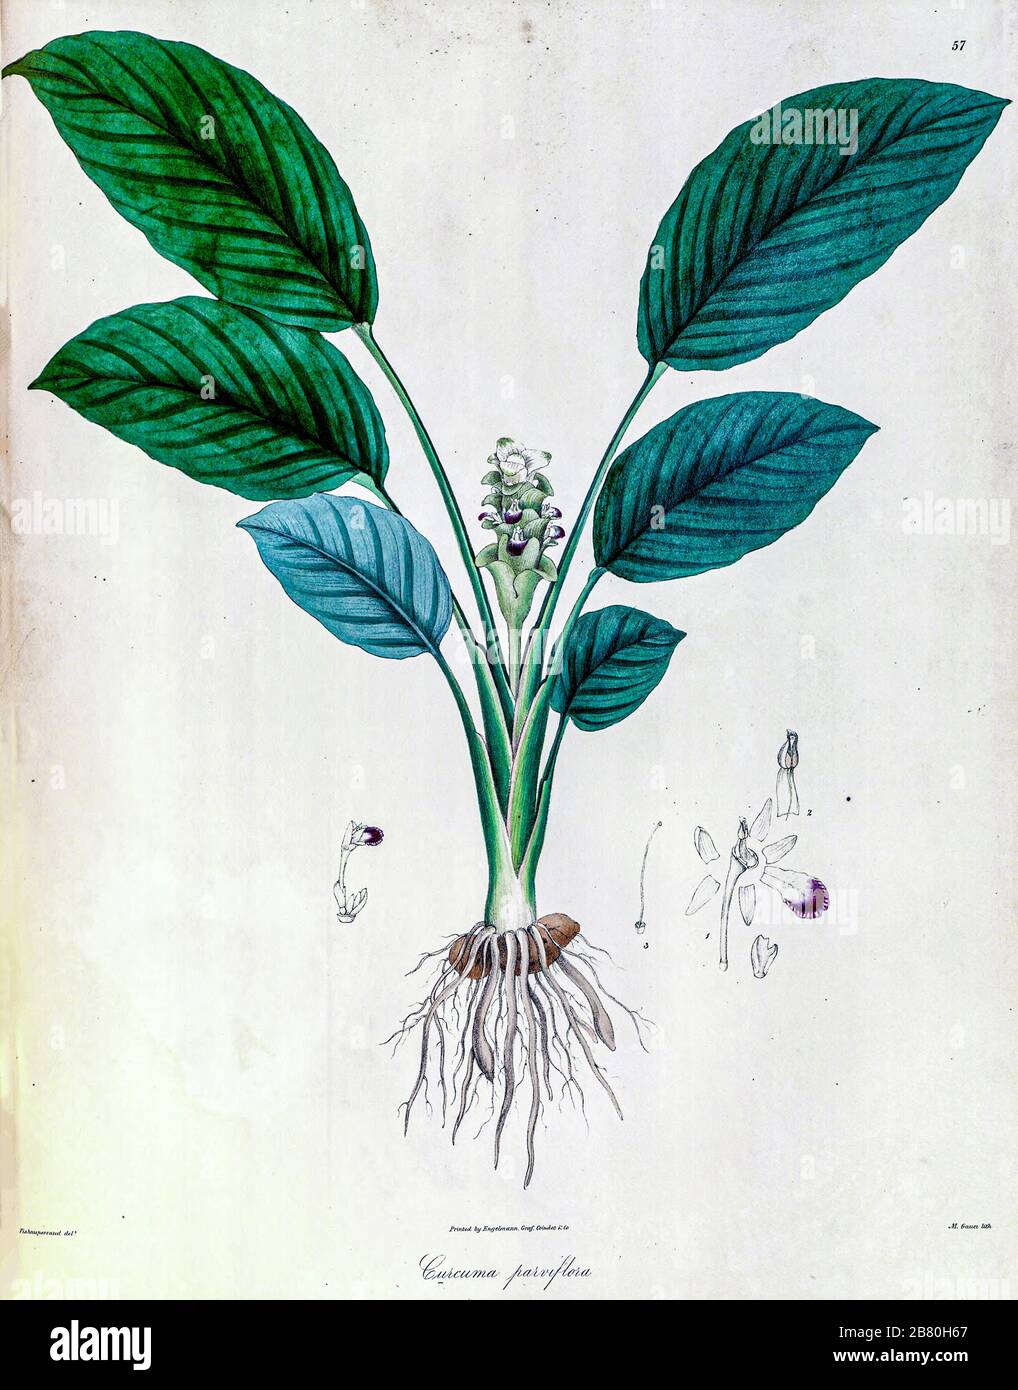 Curcuma parviflora from a Journal Article by Nathaniel Wallich in 1830 Stock Photo